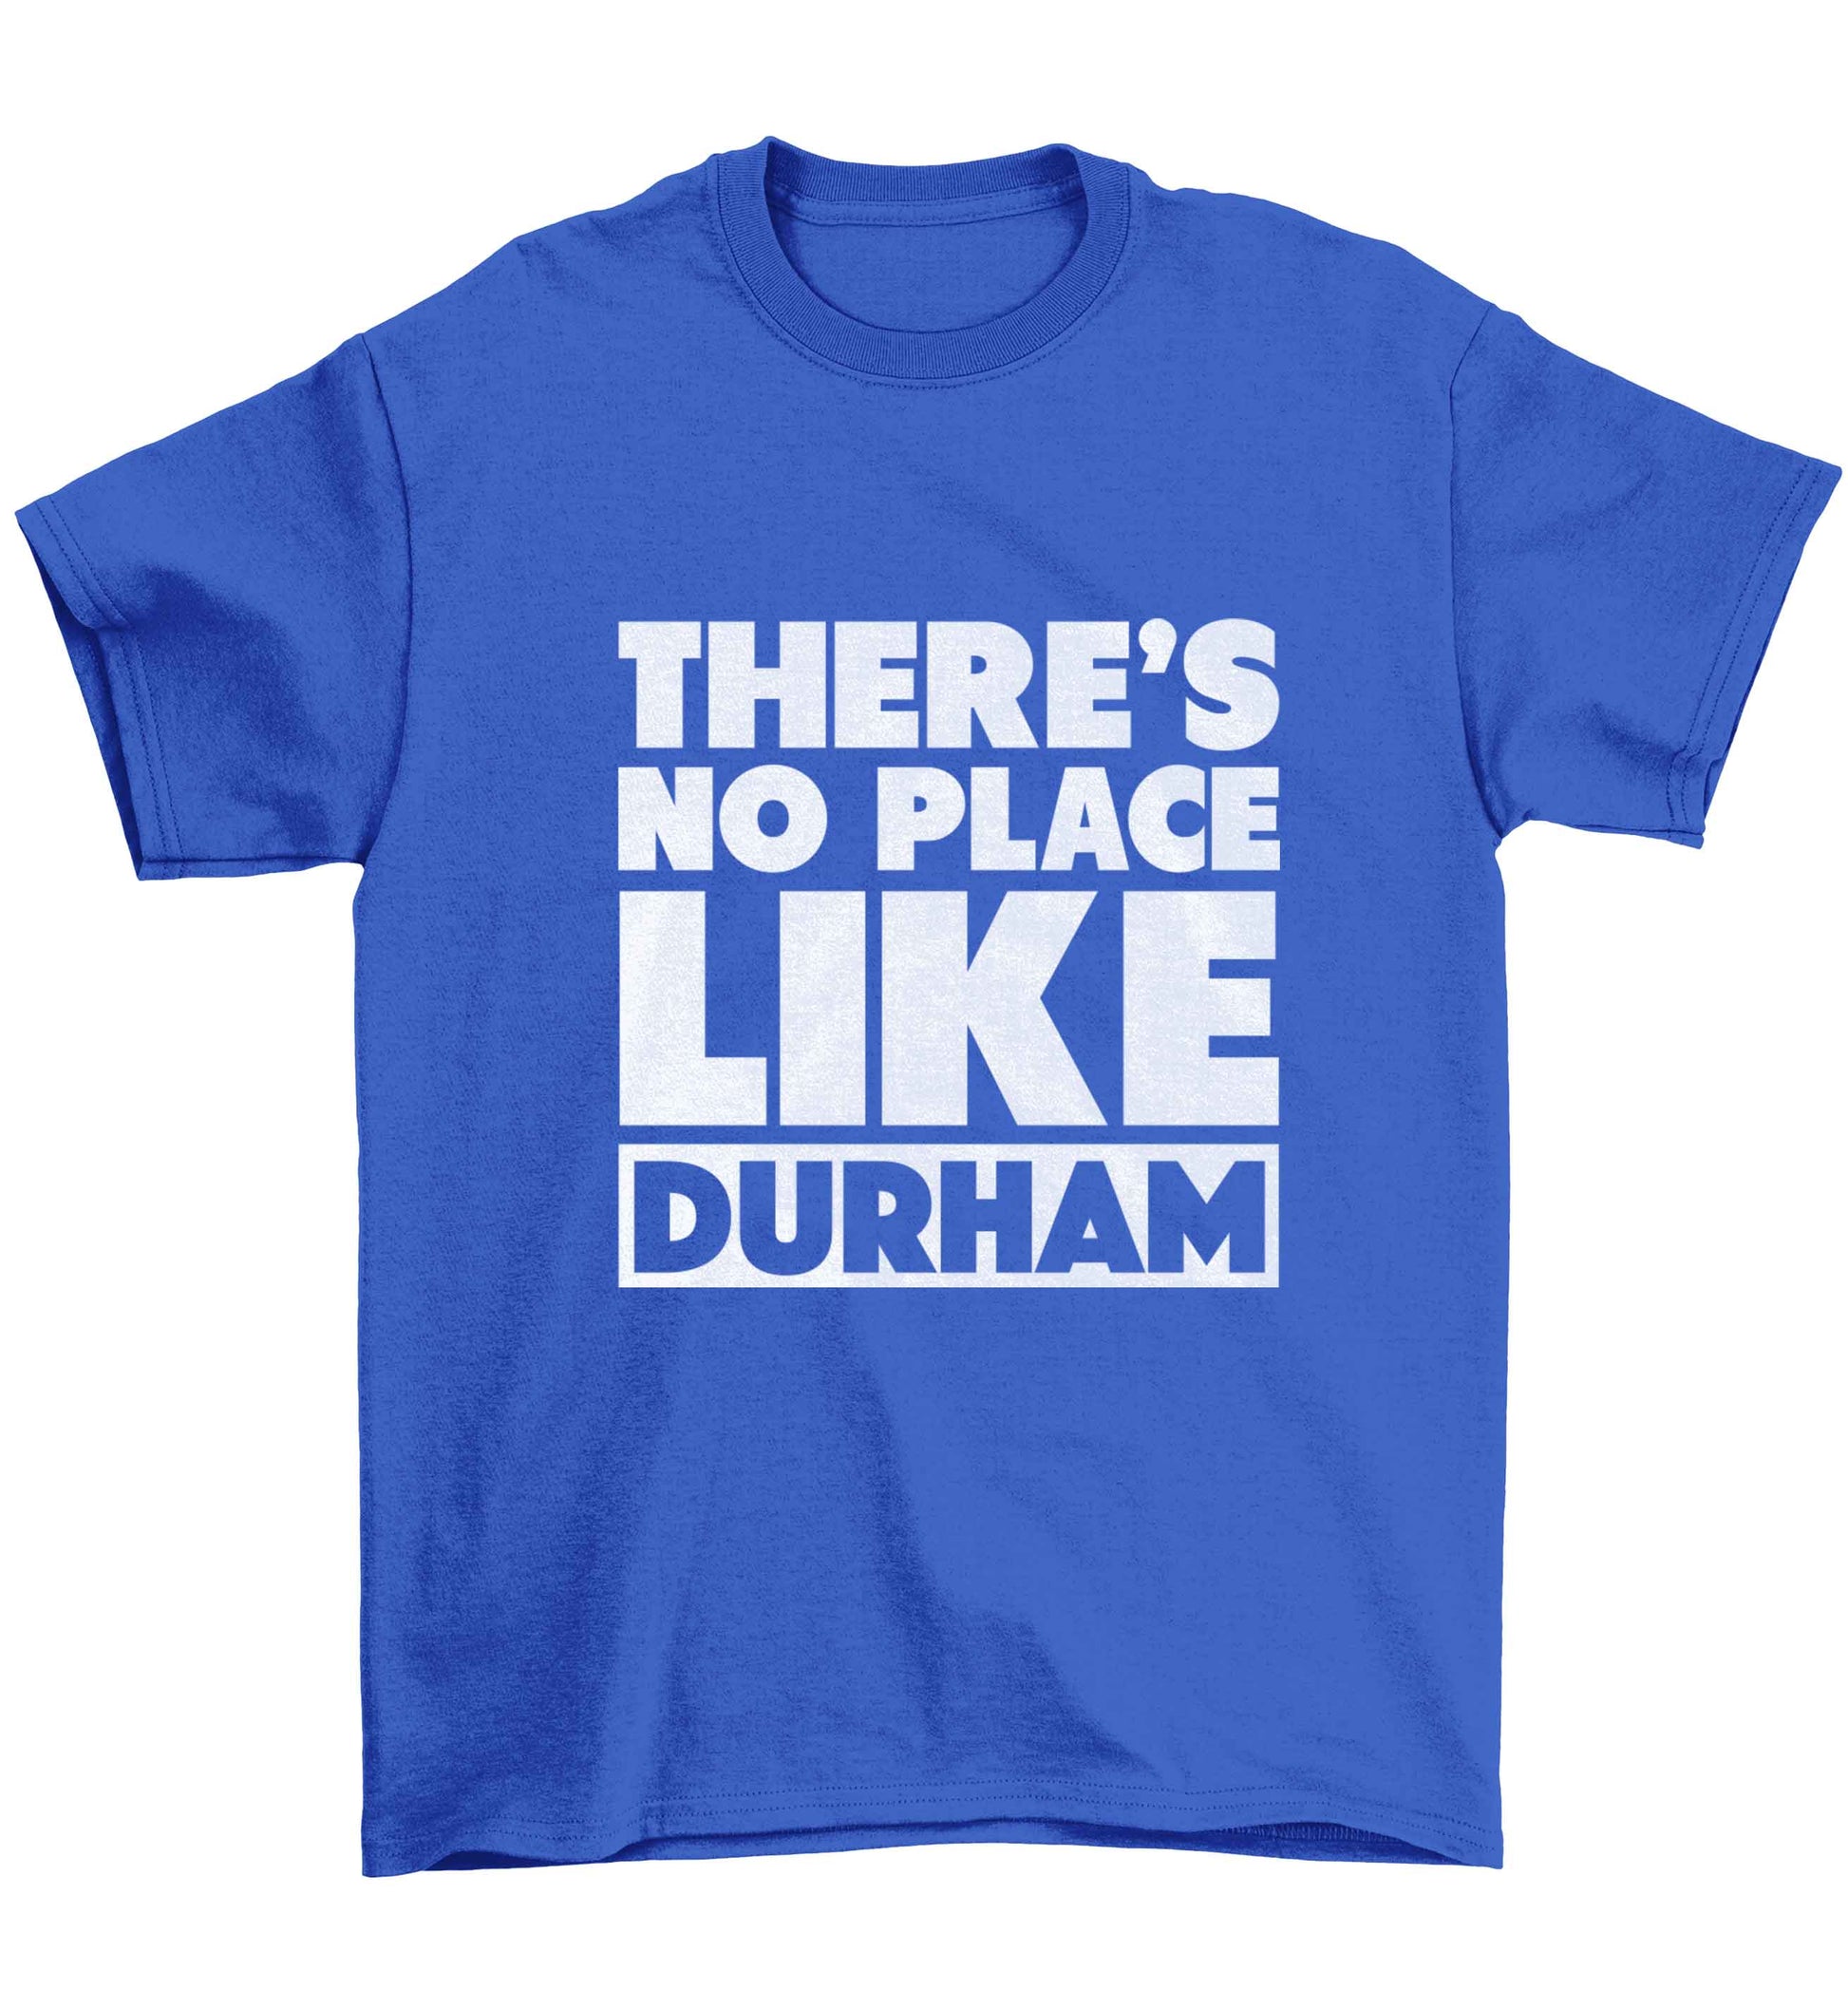 There's no place like Durham Children's blue Tshirt 12-13 Years